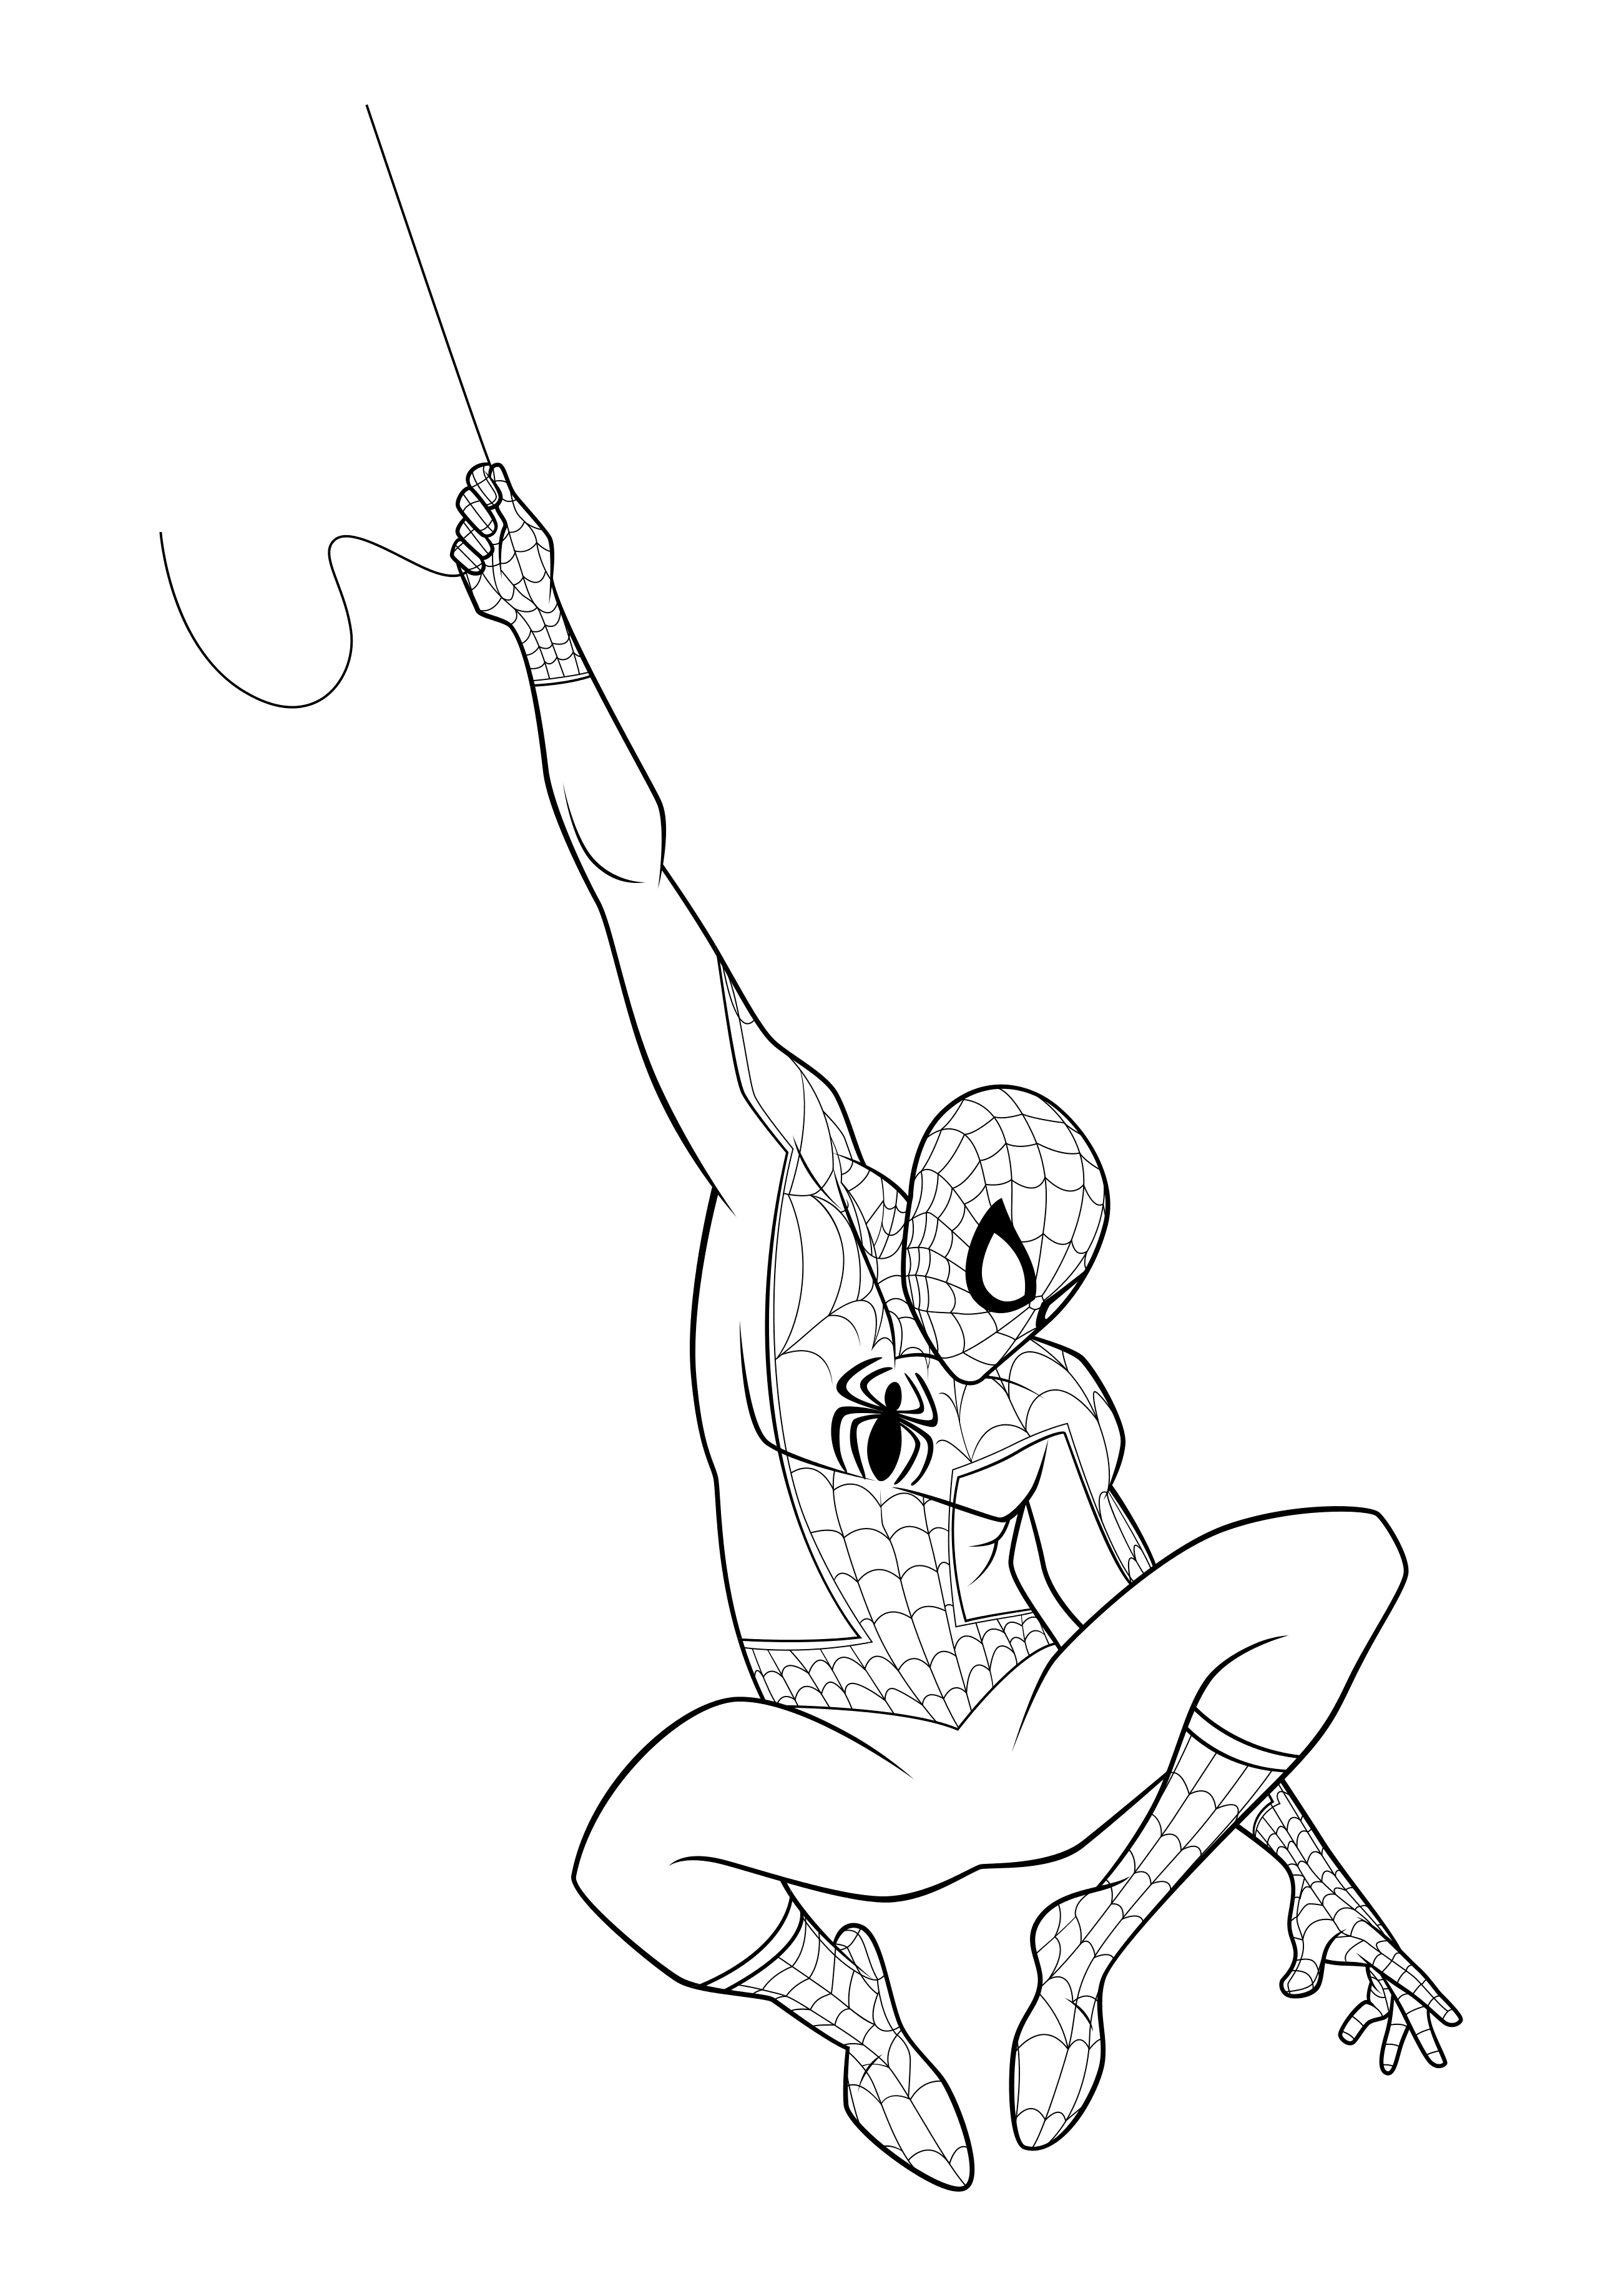 Spider-Man Coloring Pages – Print for free.